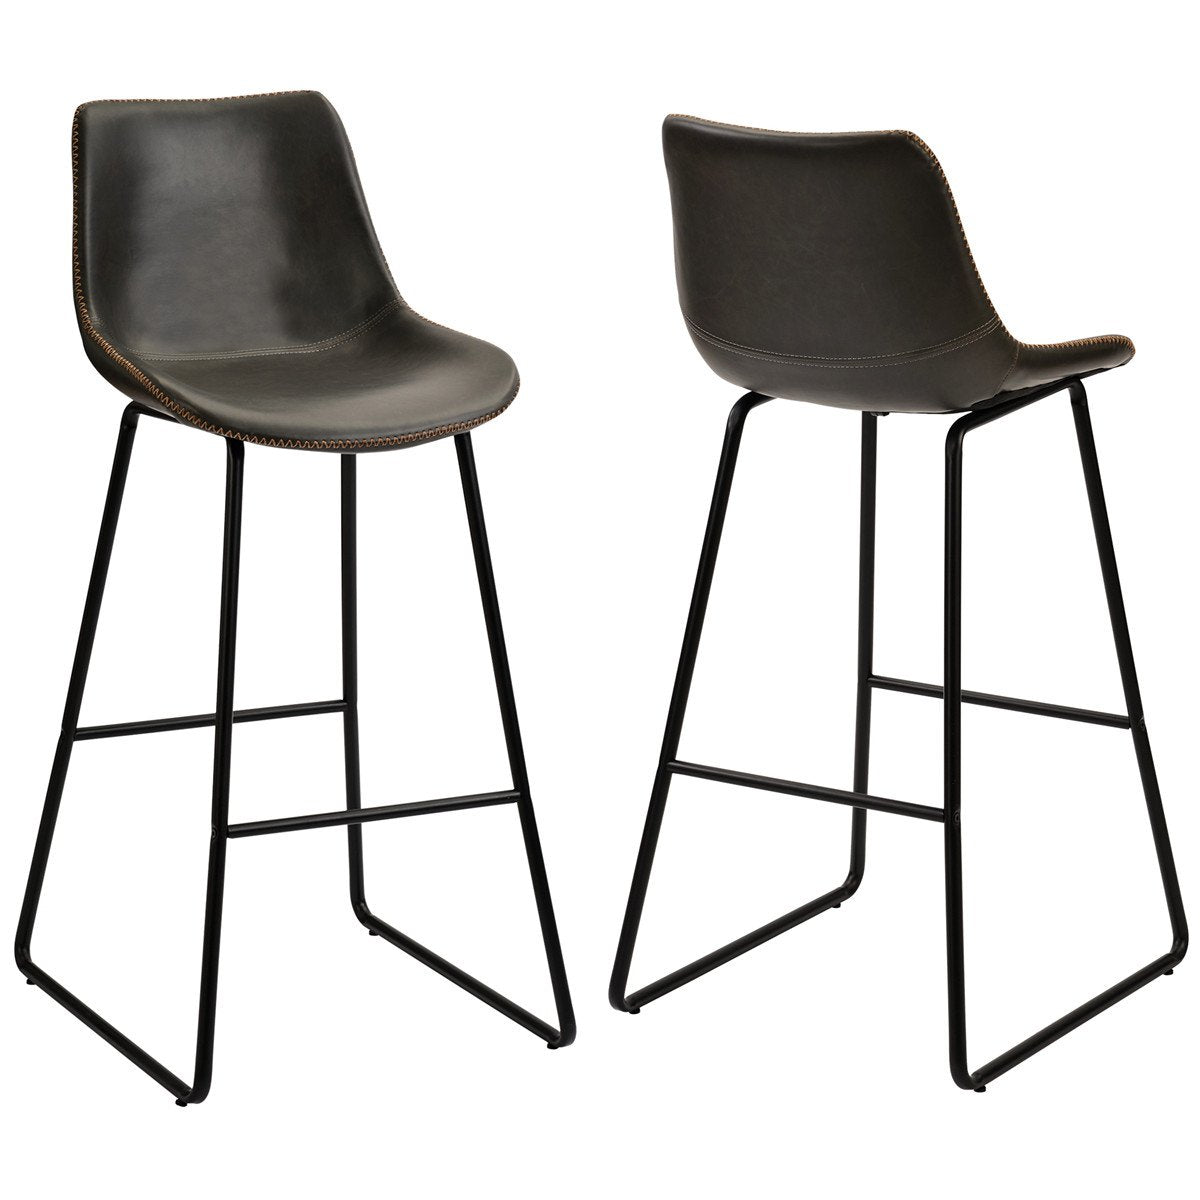 Vintage Leatherier Bar Chairs